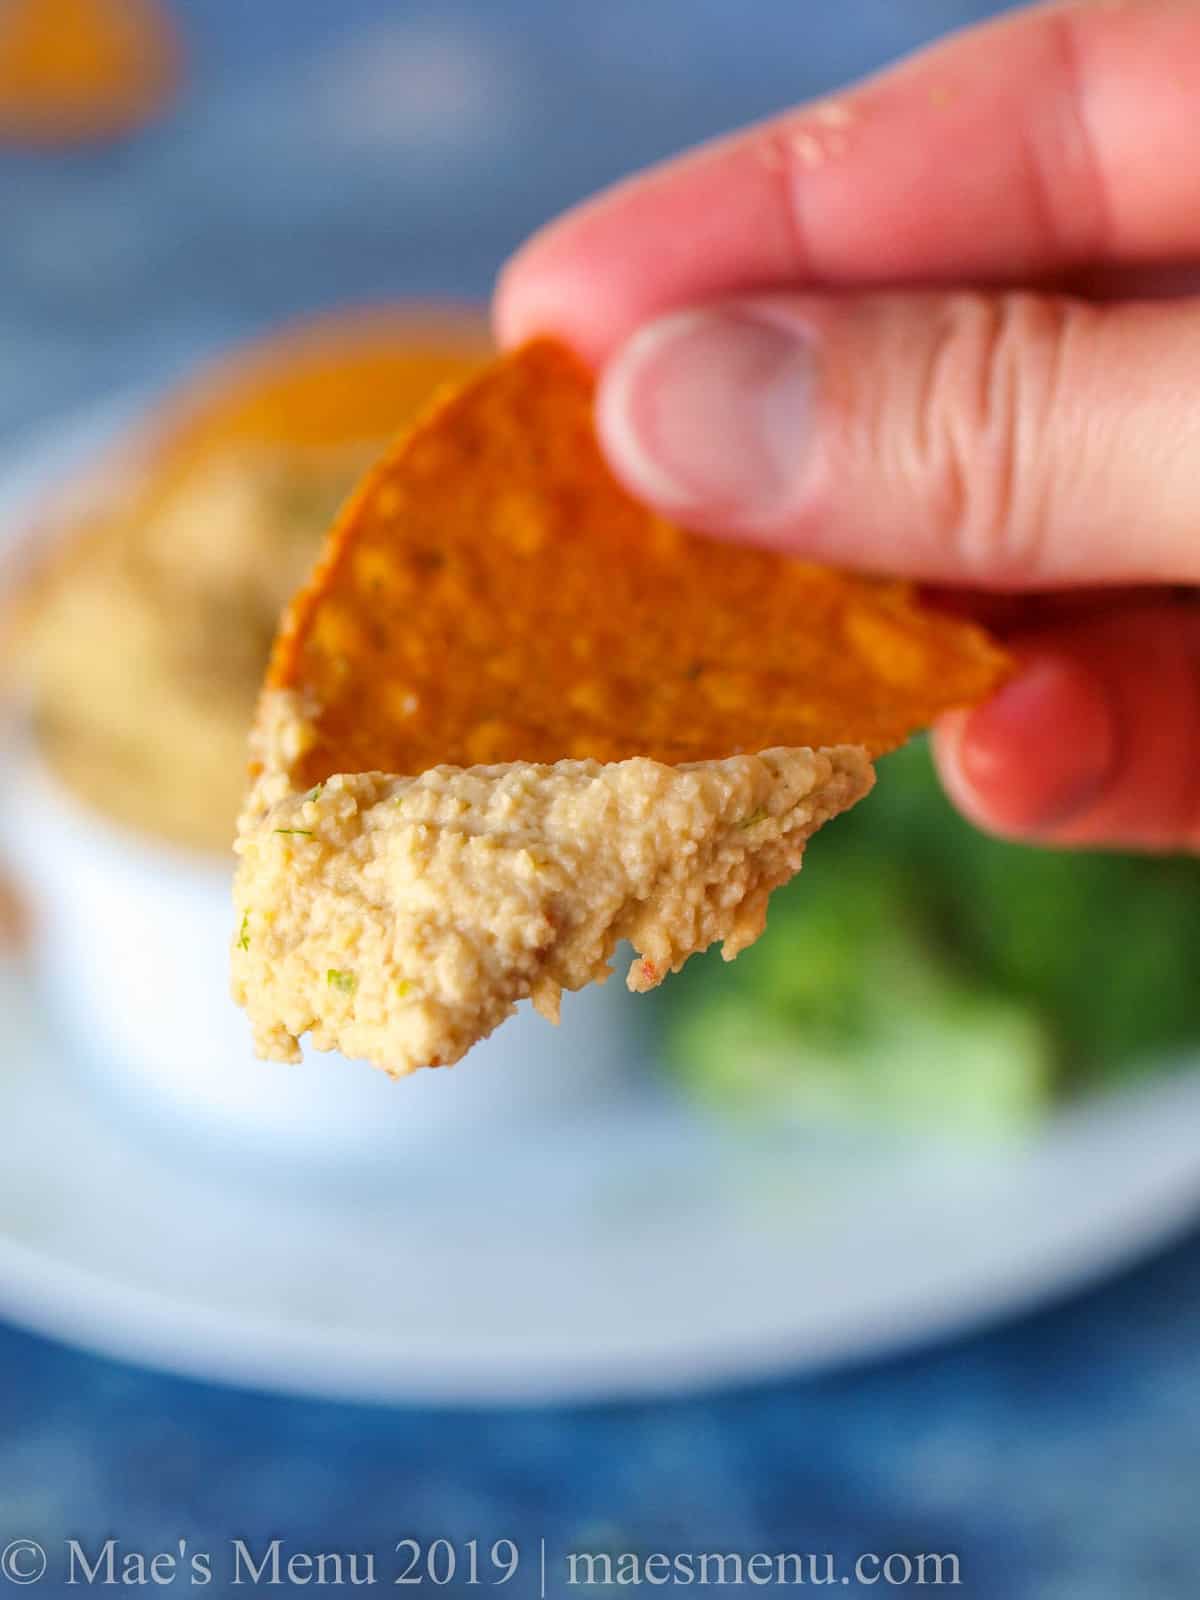 Sweet potato chip dipped in curry hummus.